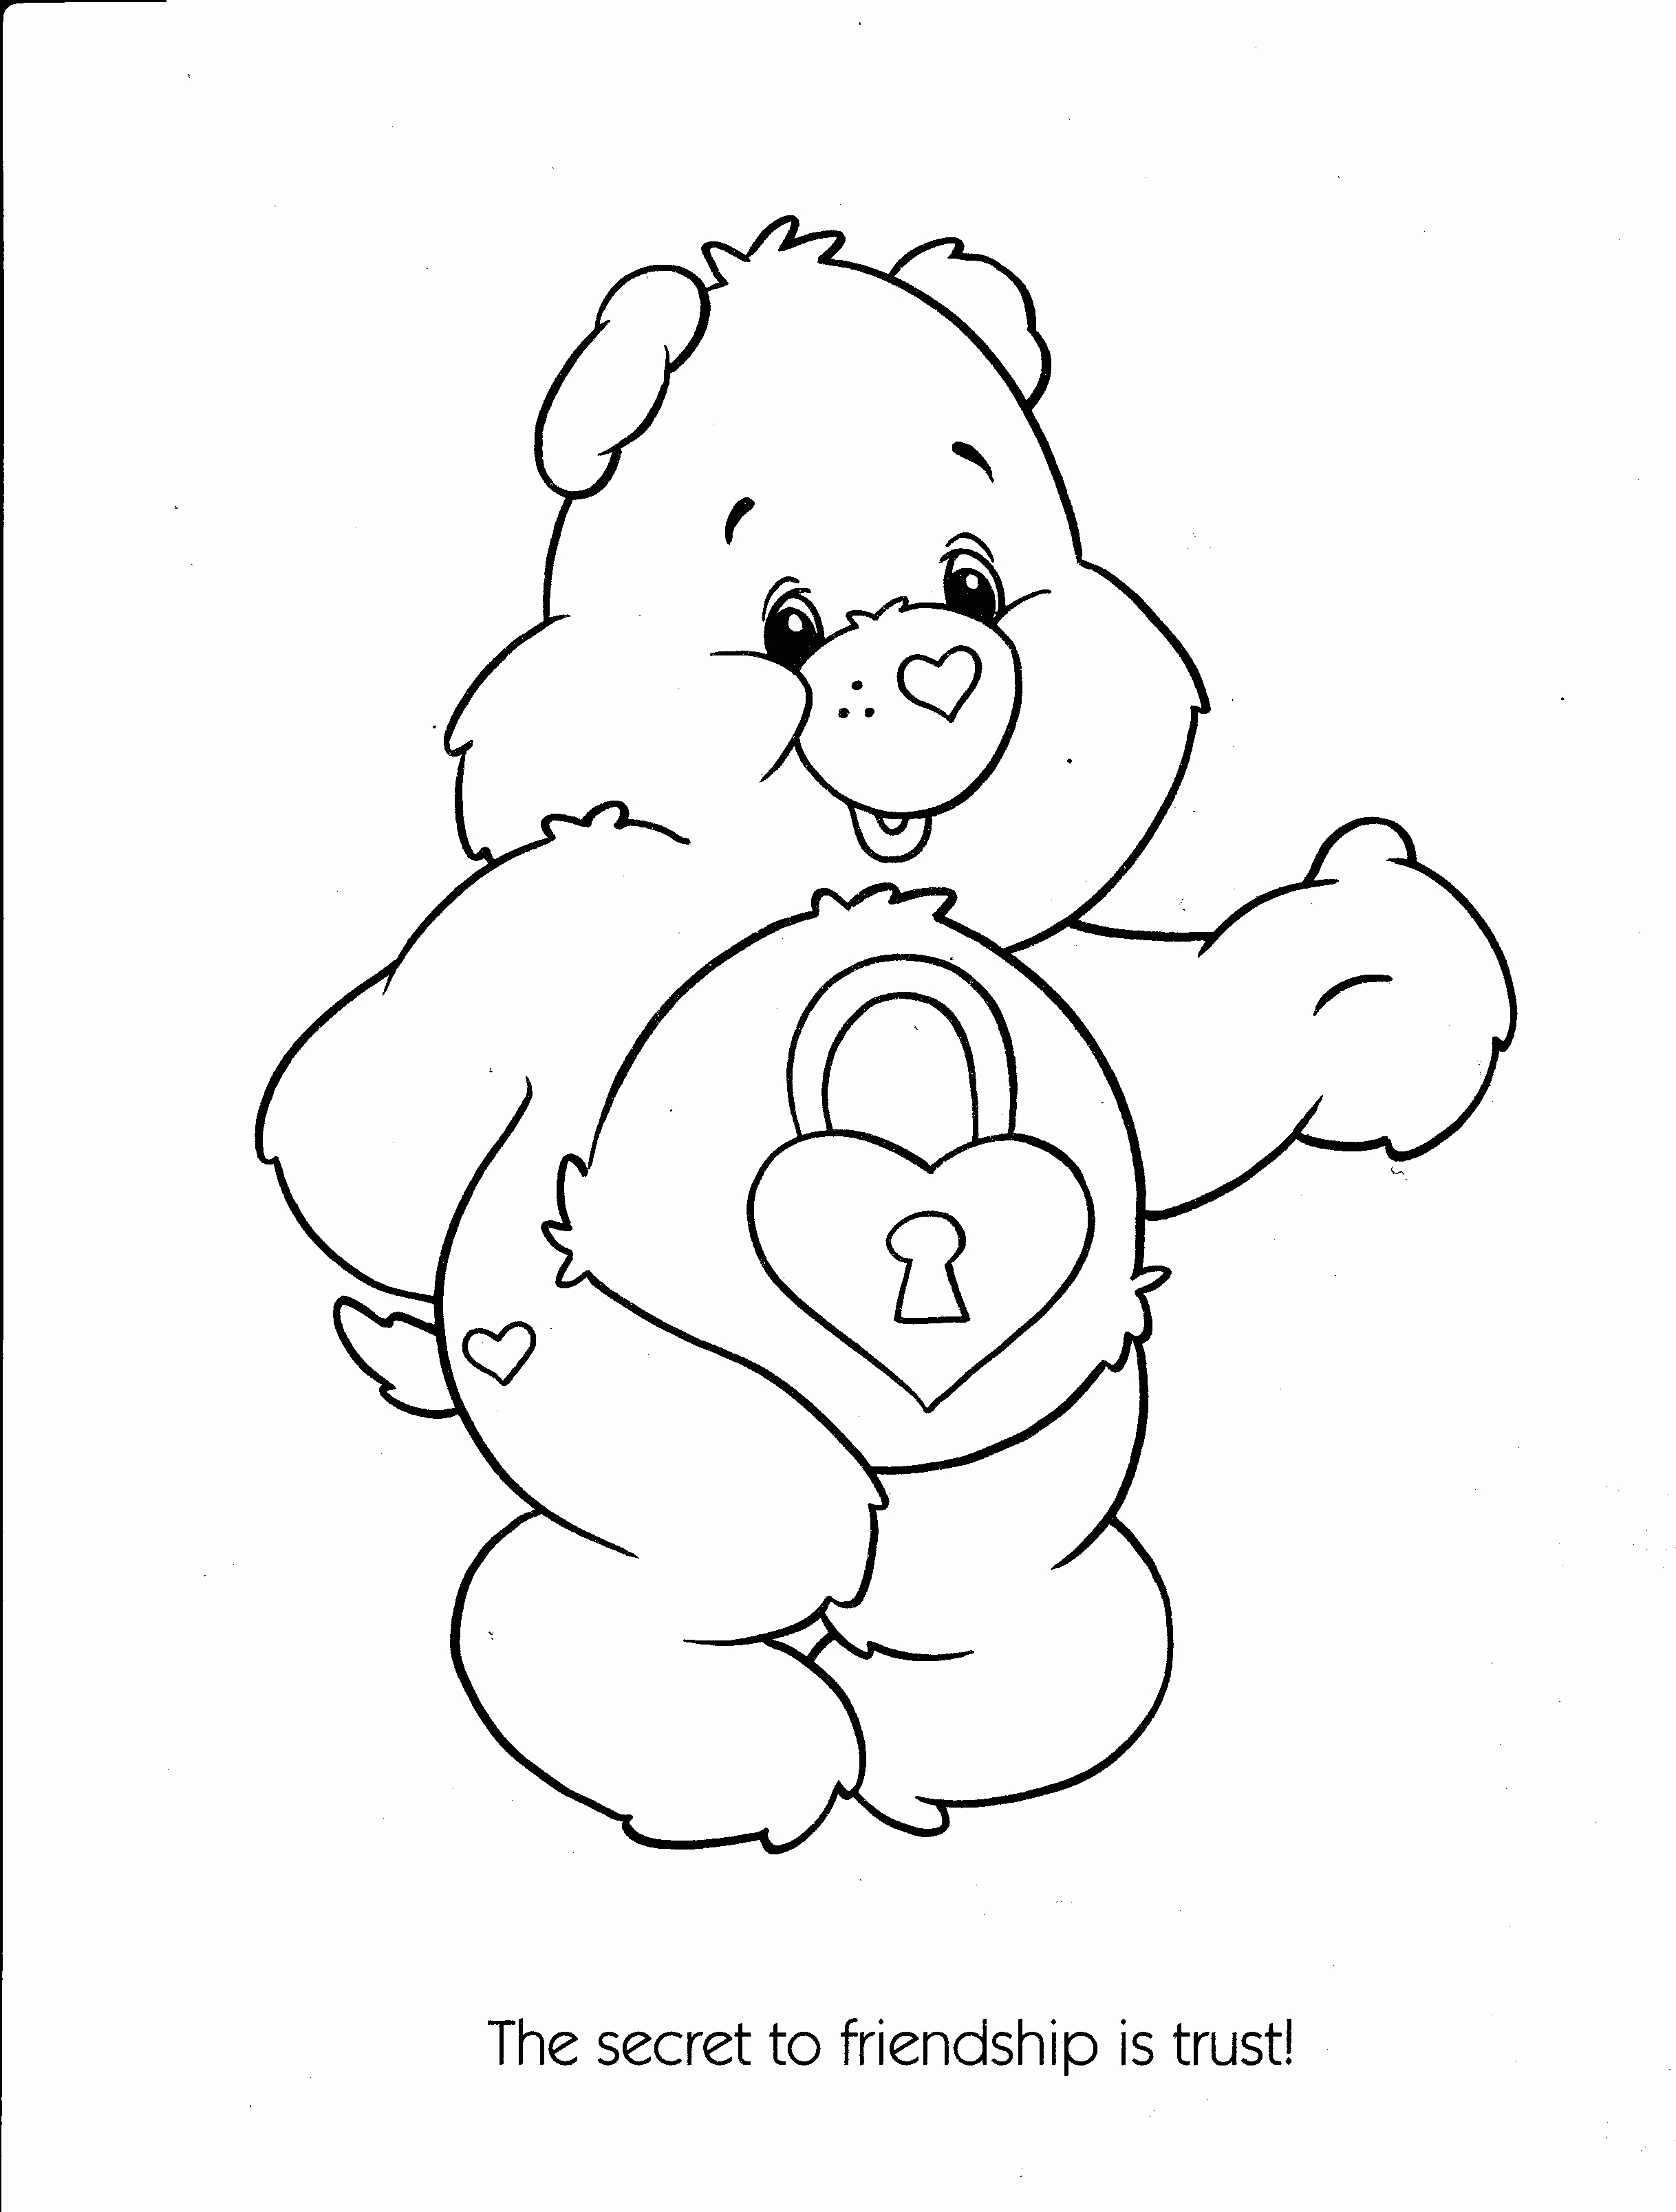 18 Free Pictures for: Care Bears Coloring Pages. Temoon.us